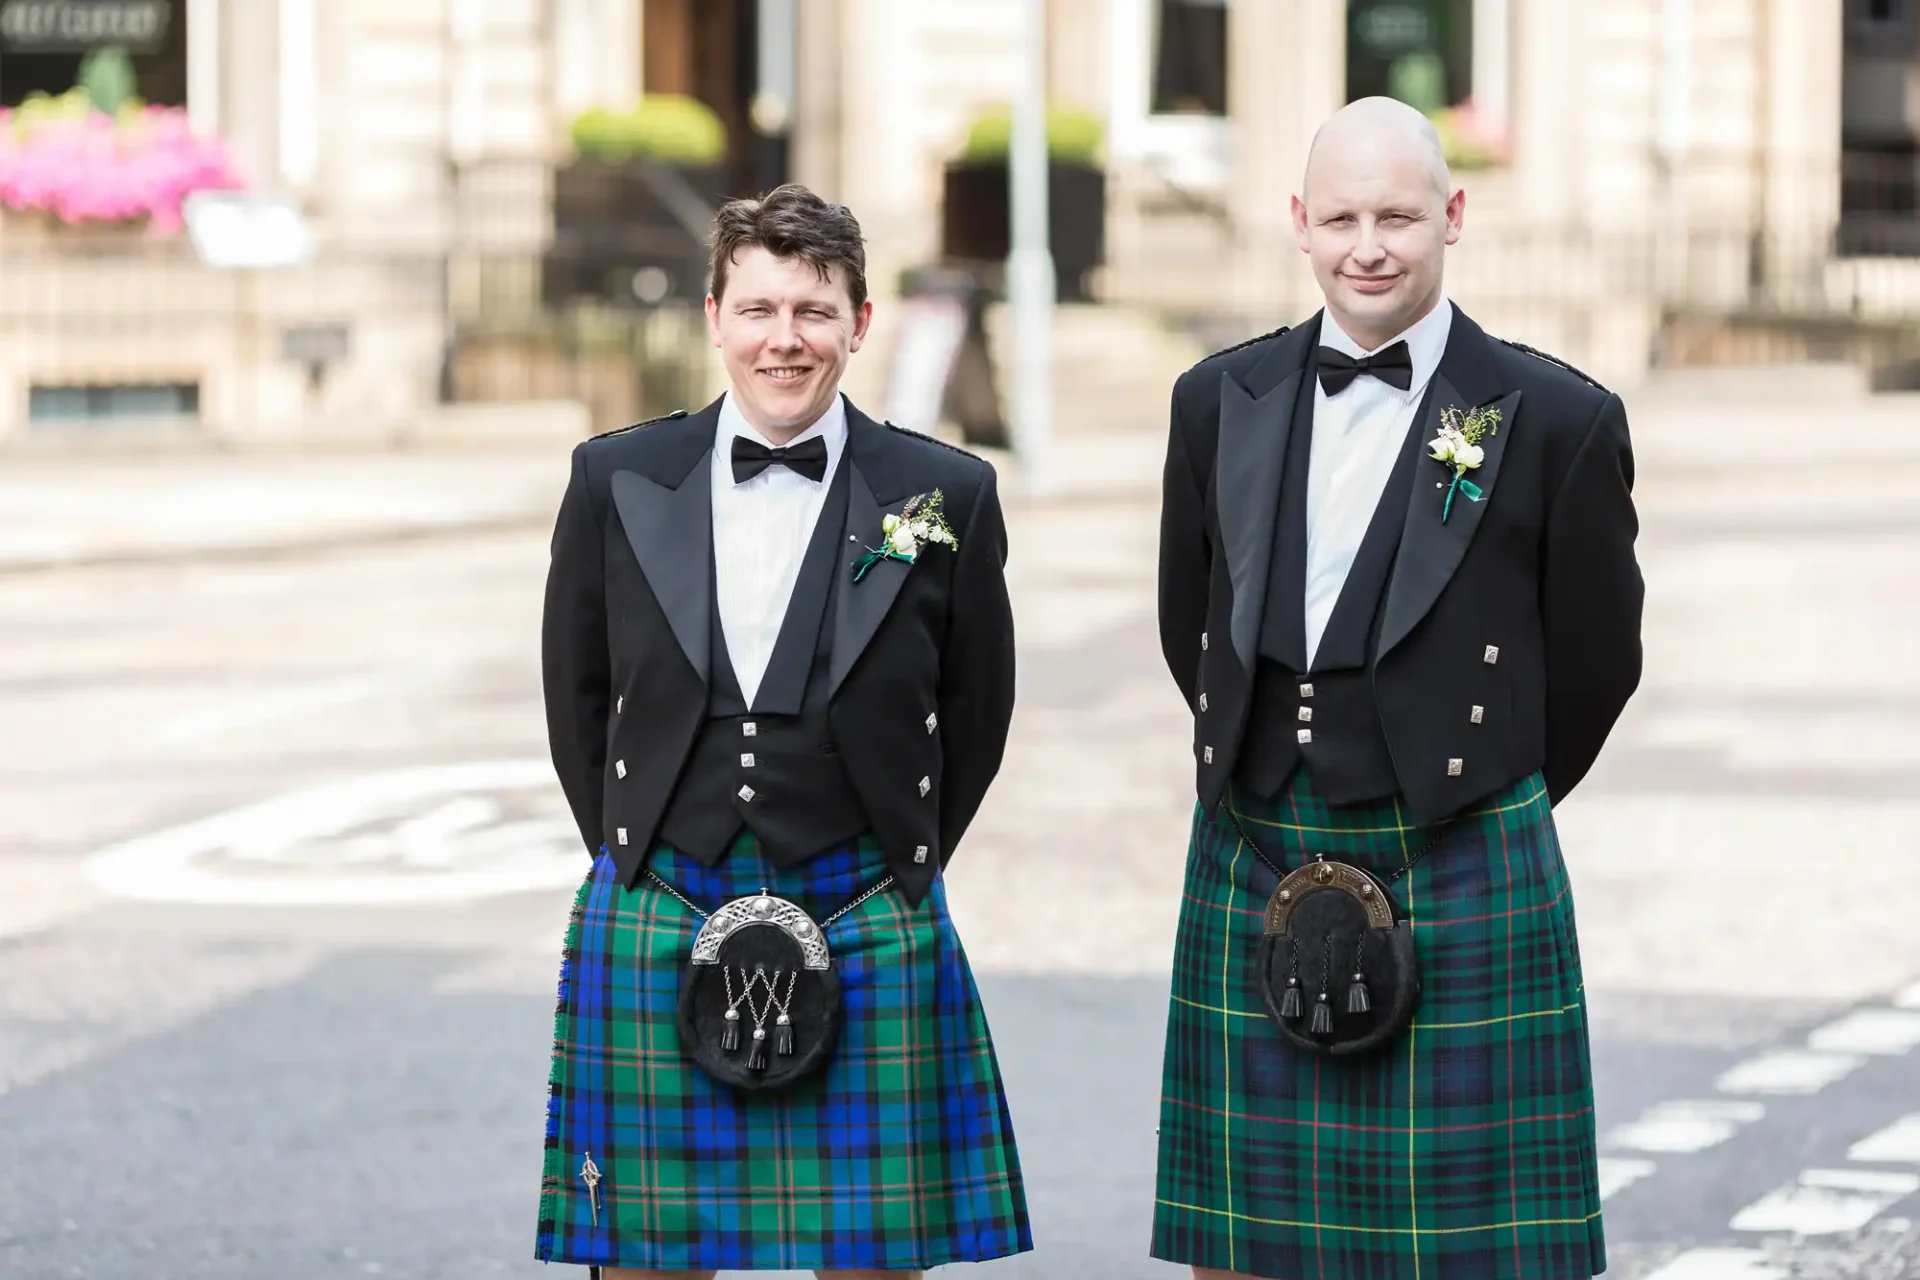 Two men in formal attire with kilts and sporran, smiling on a street, wearing bow ties and boutonnieres.